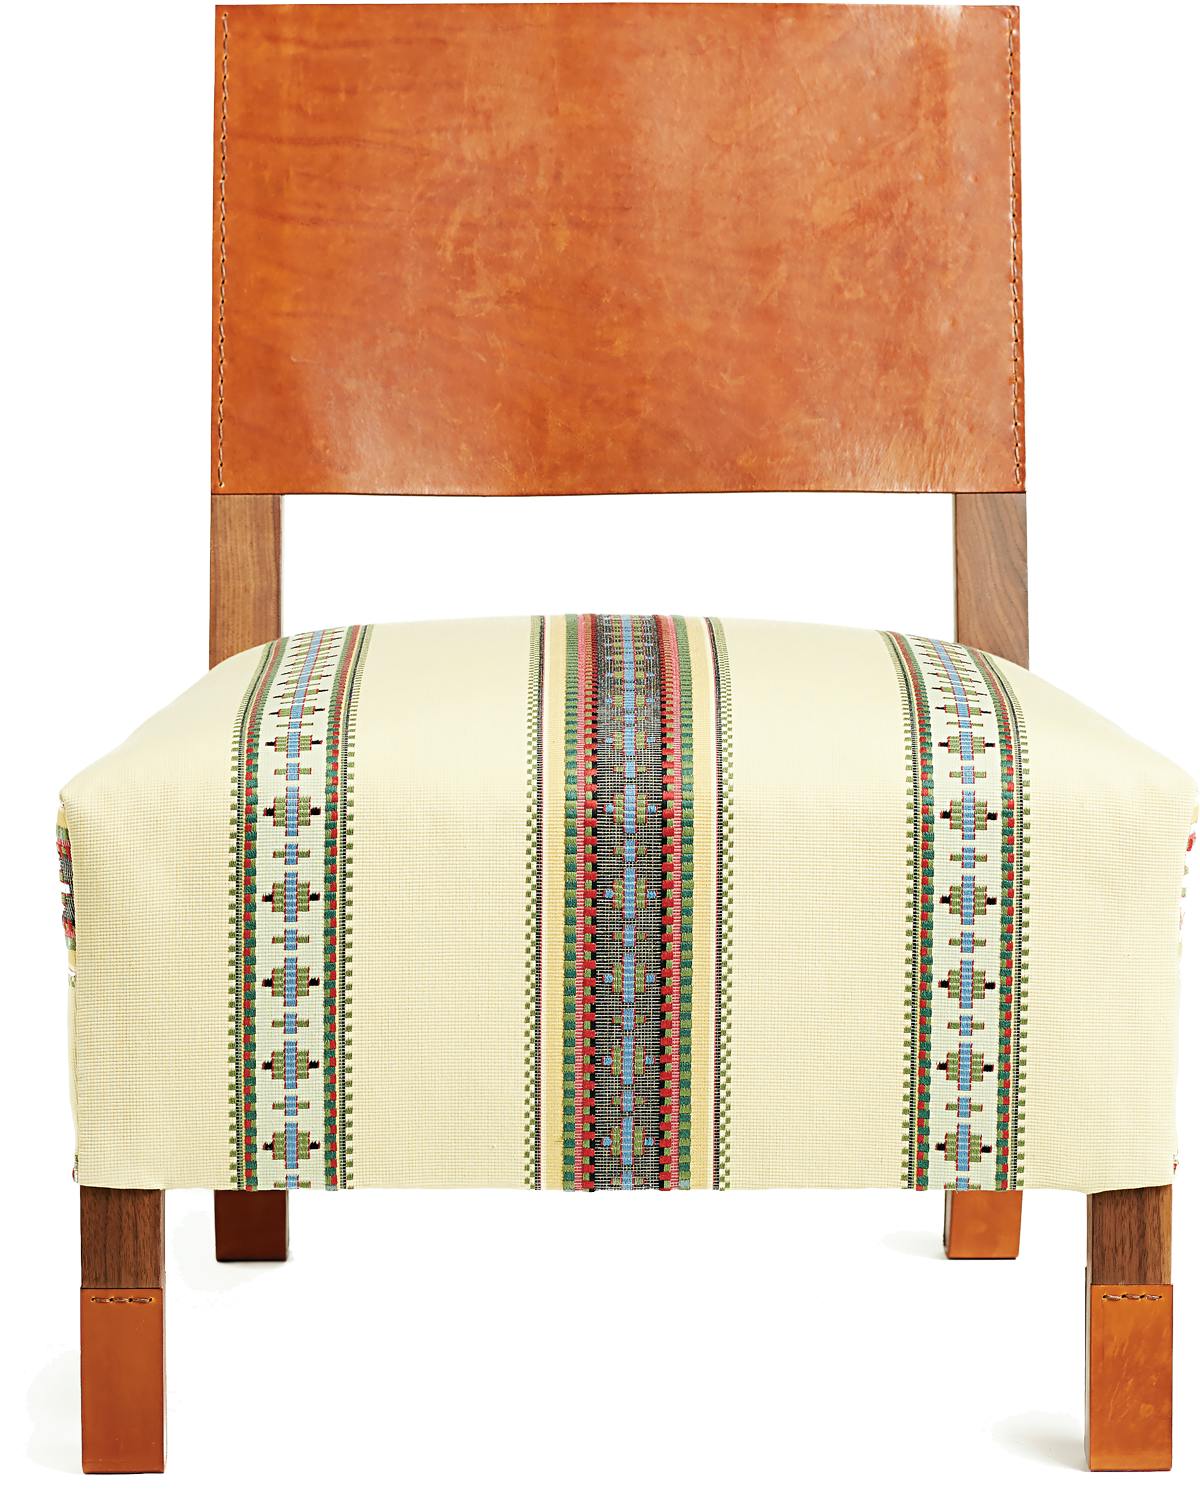 handmade chair featuring traditional upholstery techniques